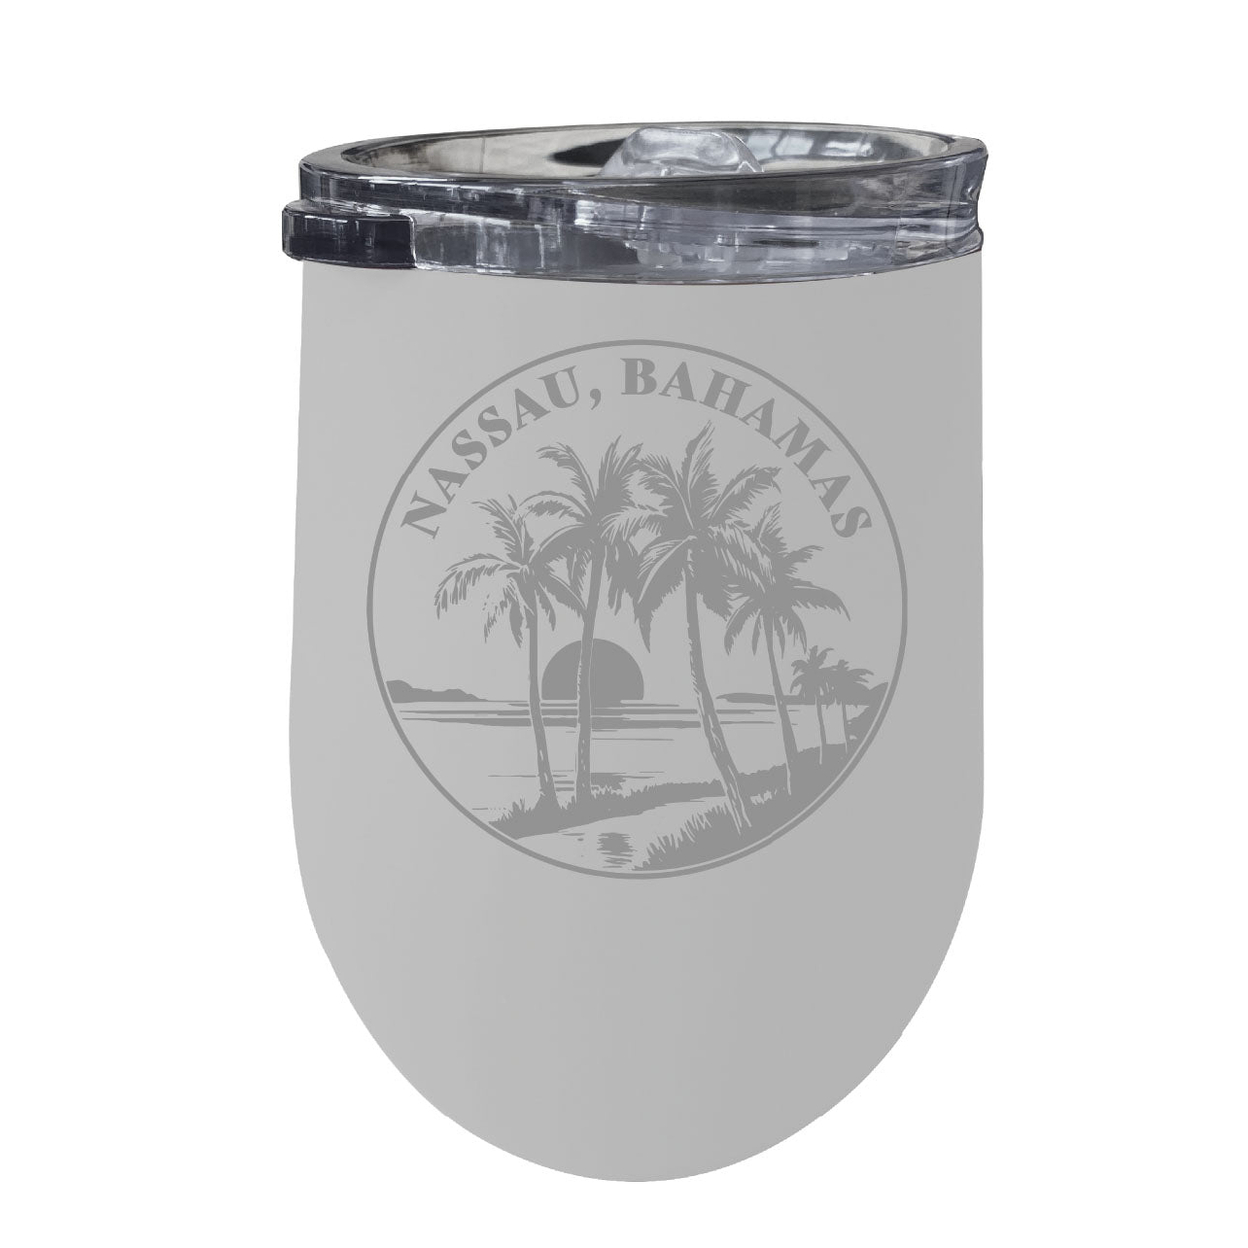 Nassau The Bahamas Souvenir 12 Oz Engraved Insulated Wine Stainless Steel Tumbler - White,,4-Pack